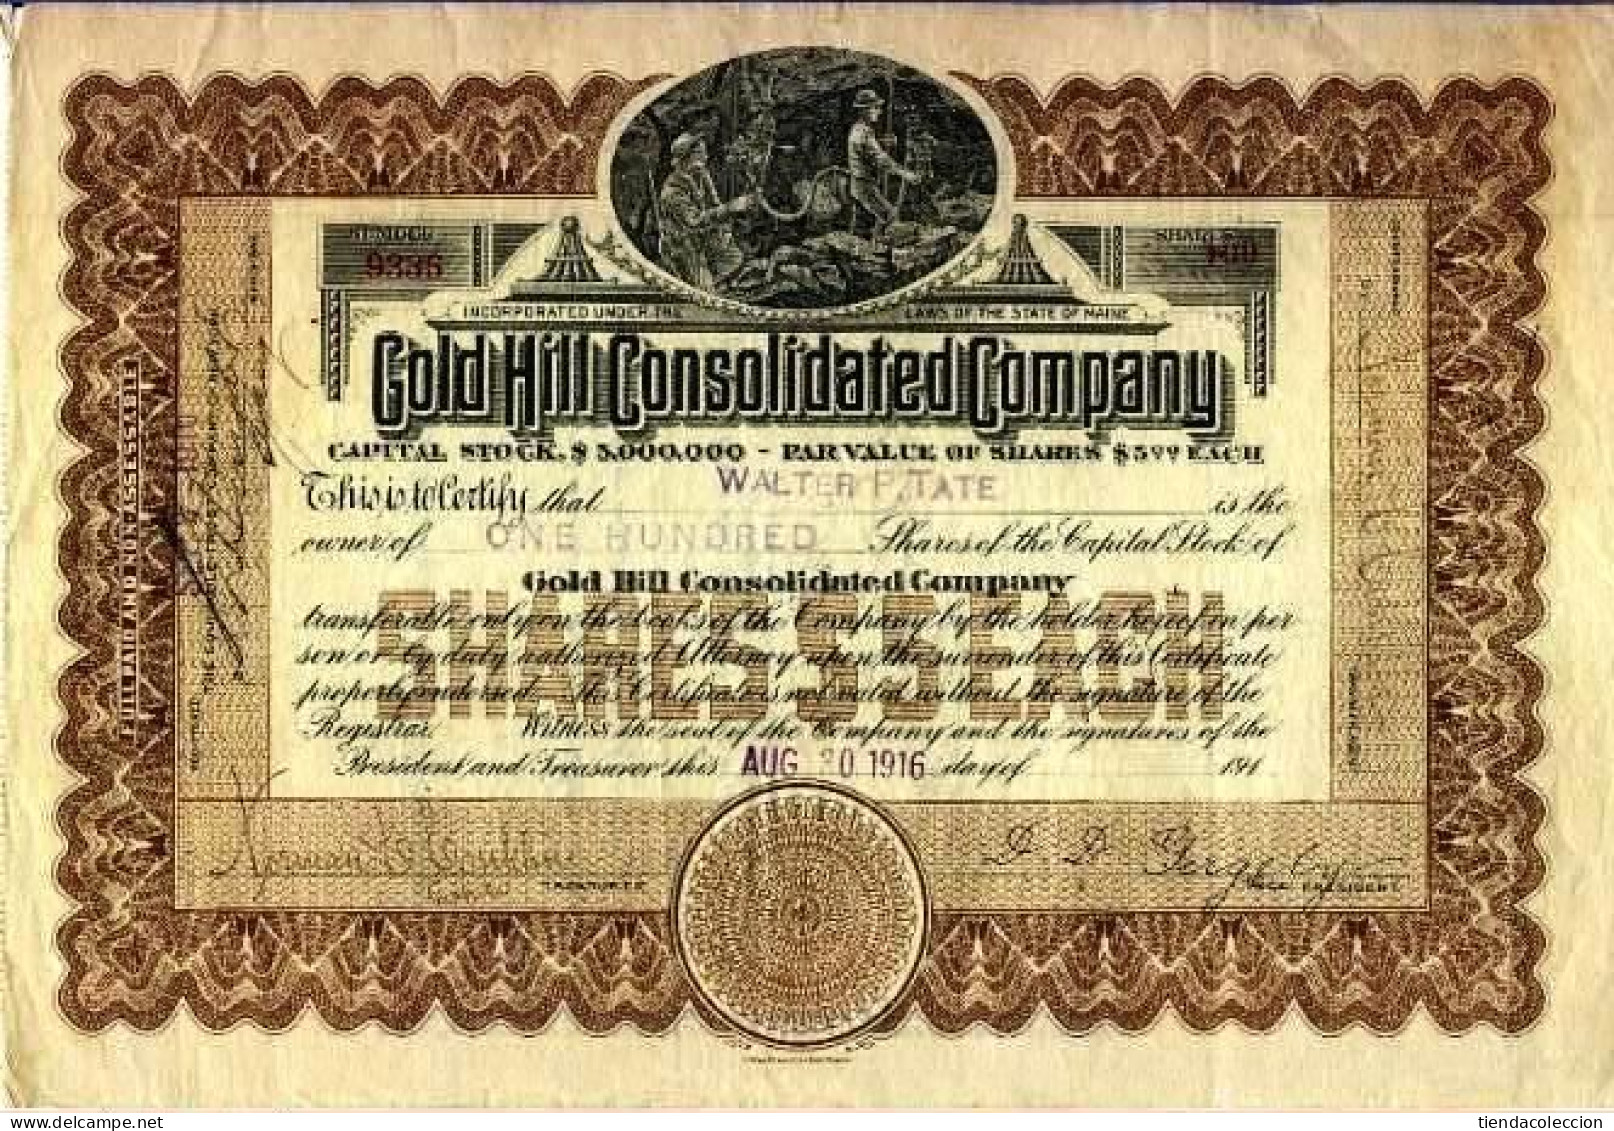 Gold Hill Consolidated Company - G - I